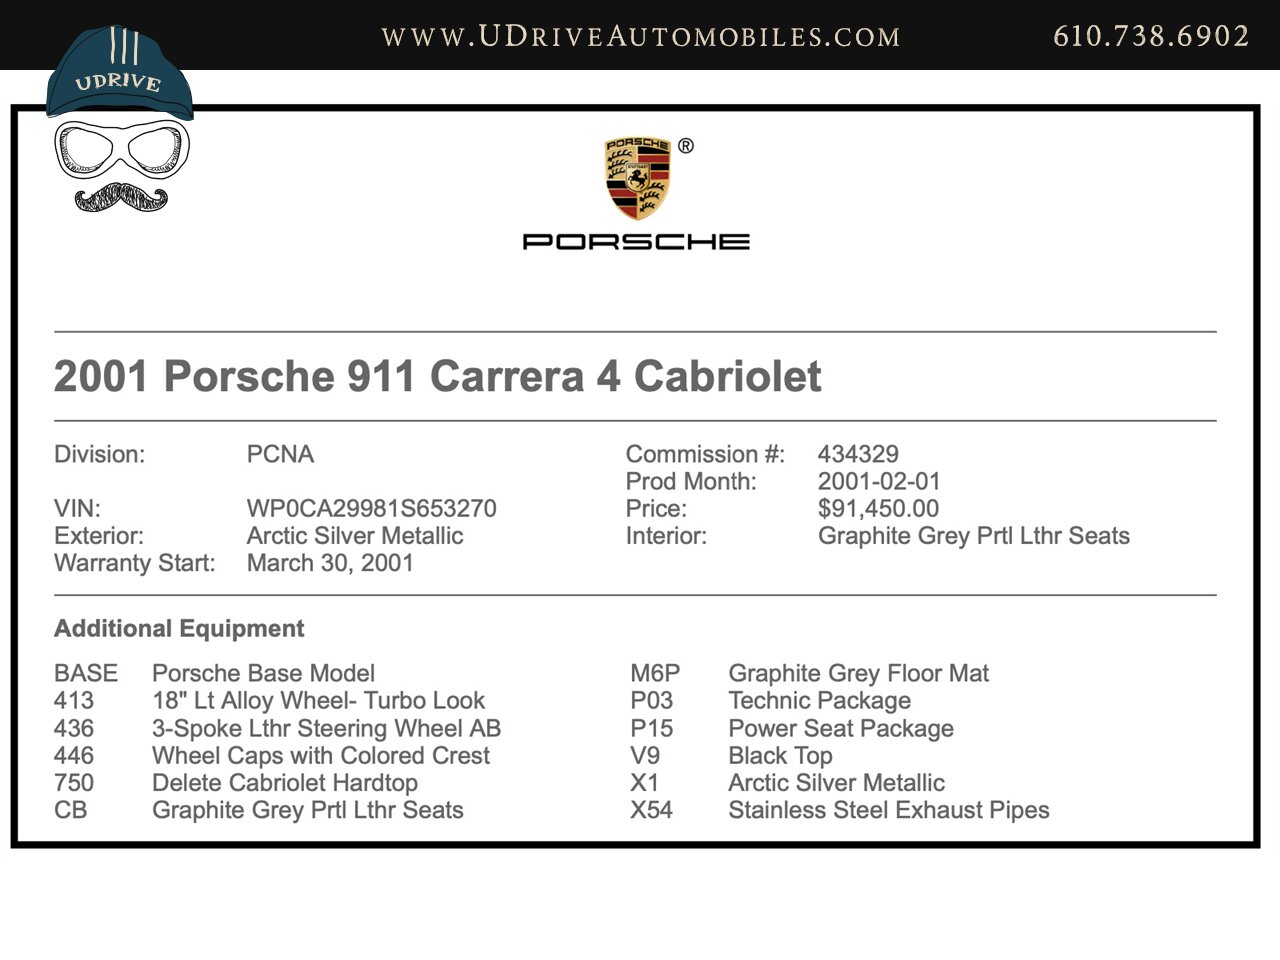 2001 Porsche 911 Carrera 4 Cabriolet Tiptronic IMS Upgrade  Power Seats 18in Turbo Look Wheels 2 Owners $5k Recent Service - Photo 2 - West Chester, PA 19382